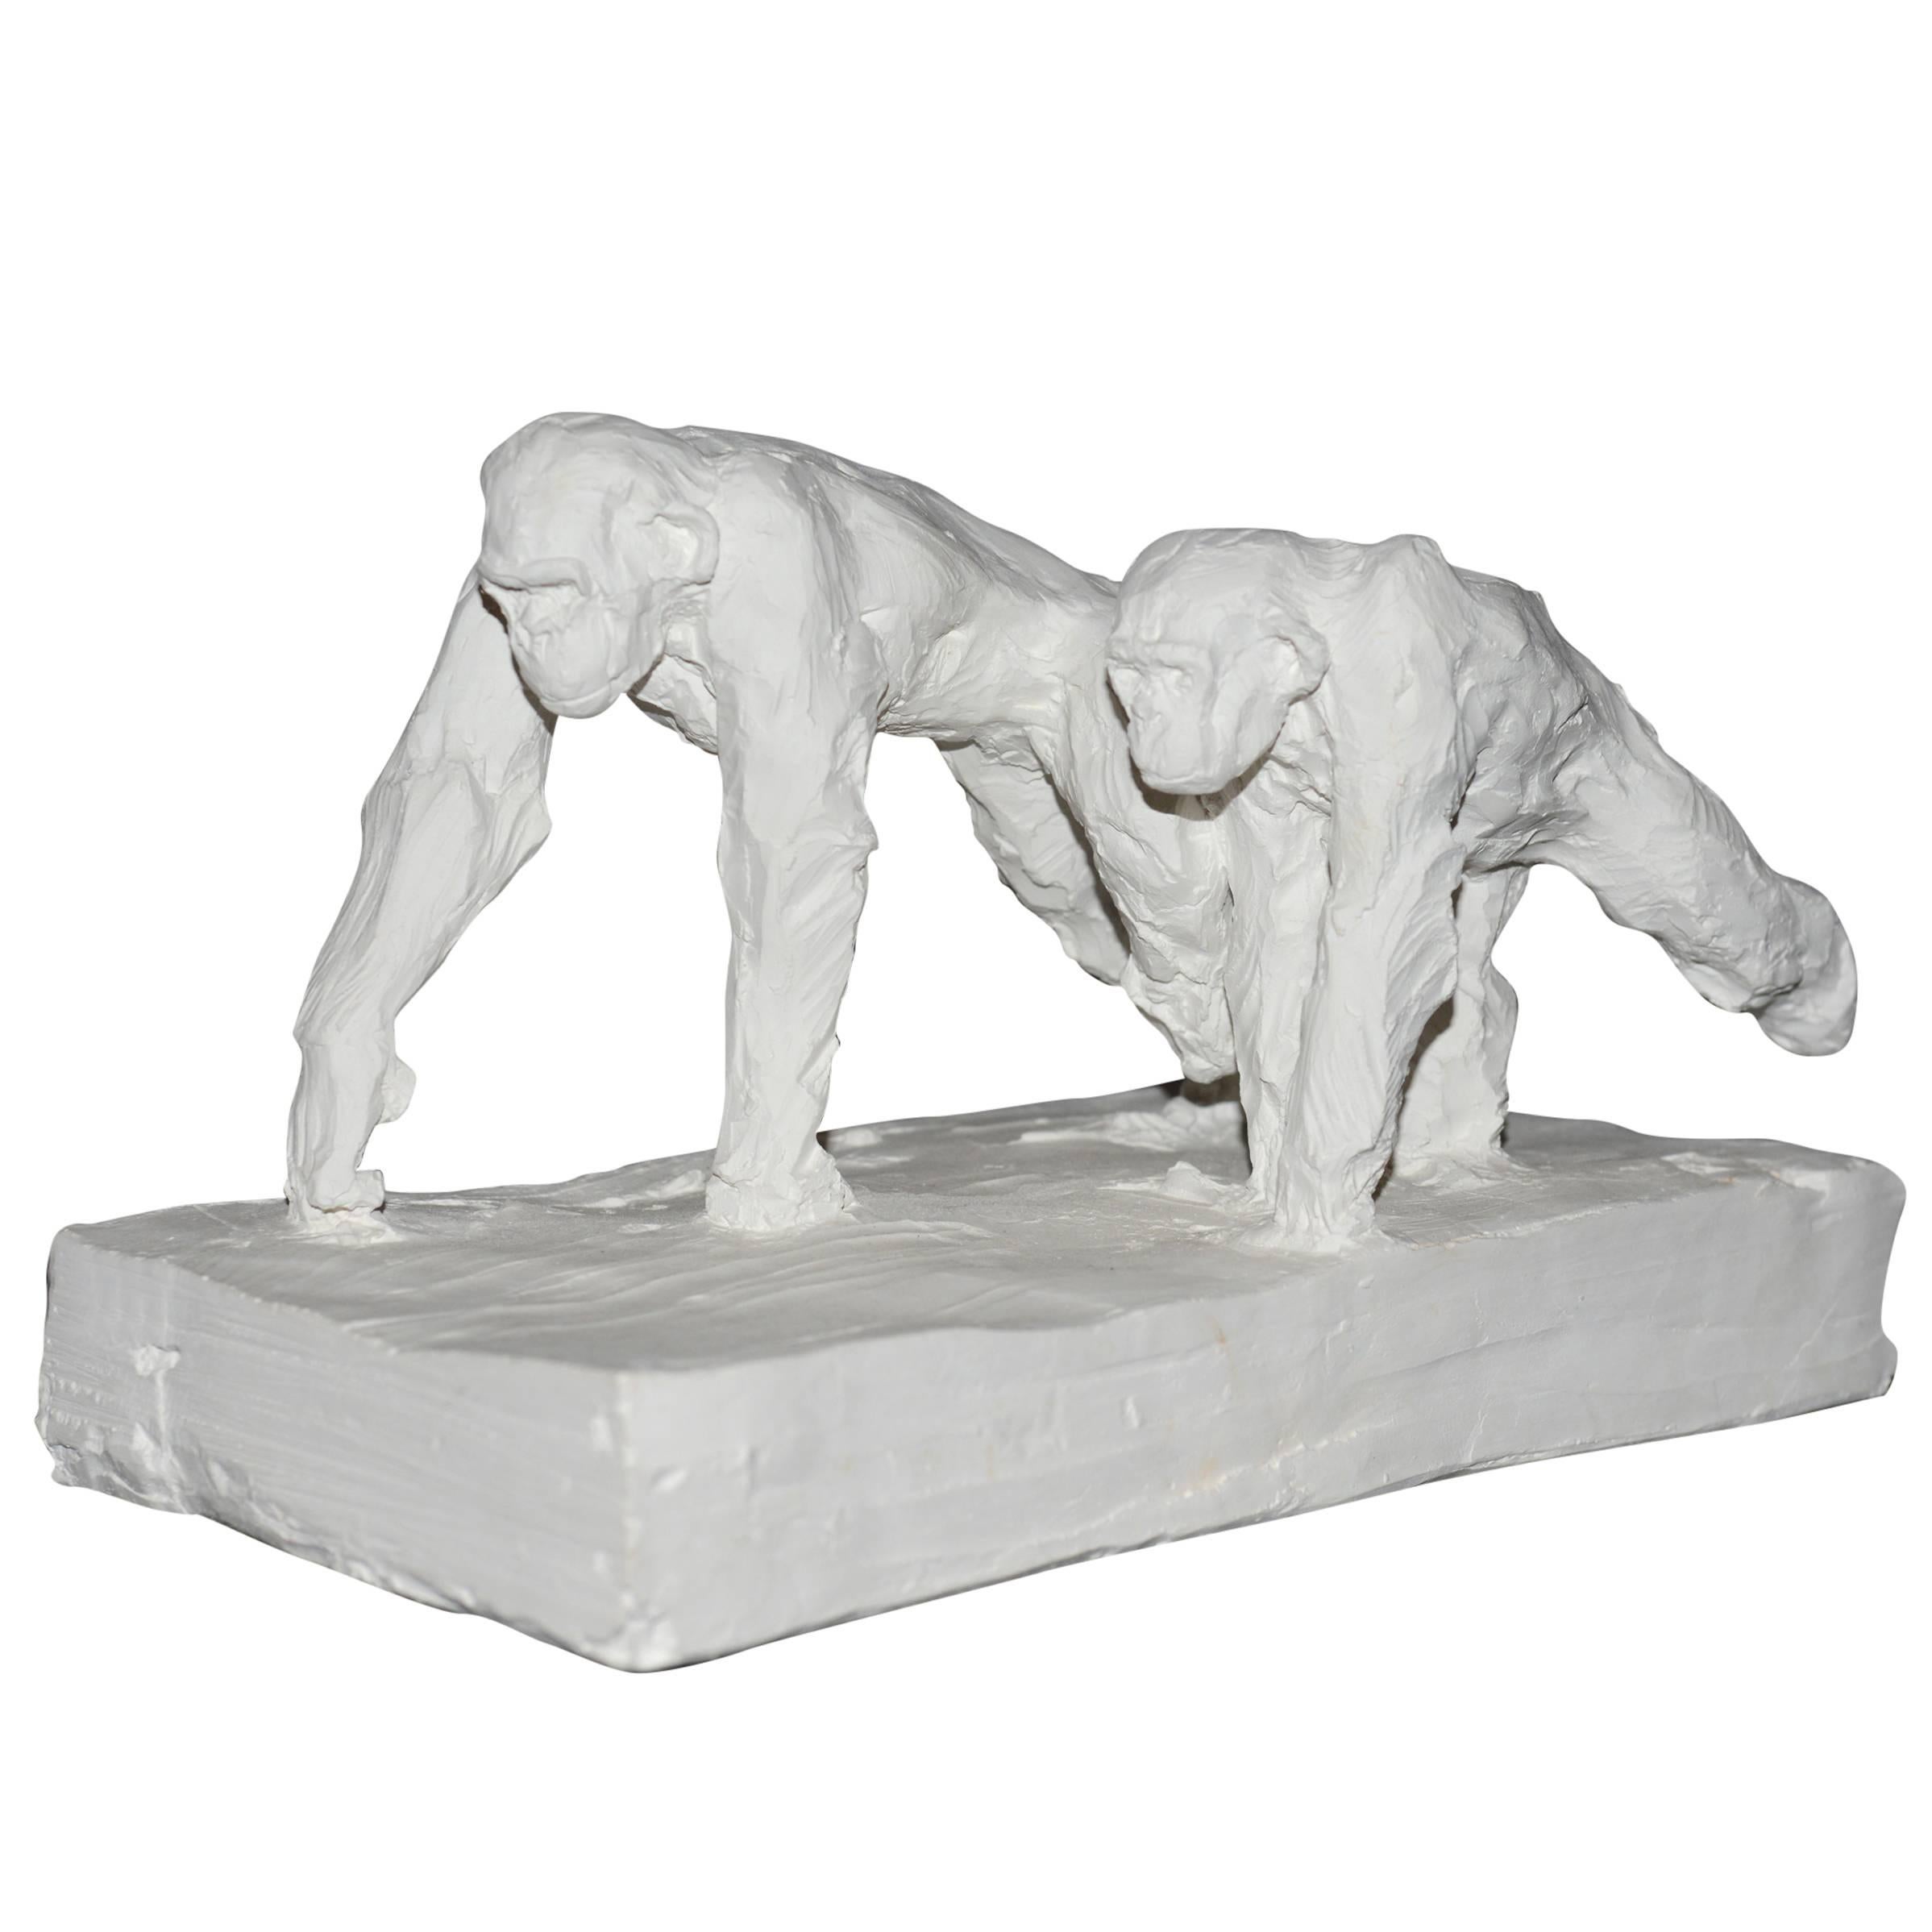 Sculpture Double Chimpanzee in Plaster Limited Edition 30/50 by J.B Vandame 2015